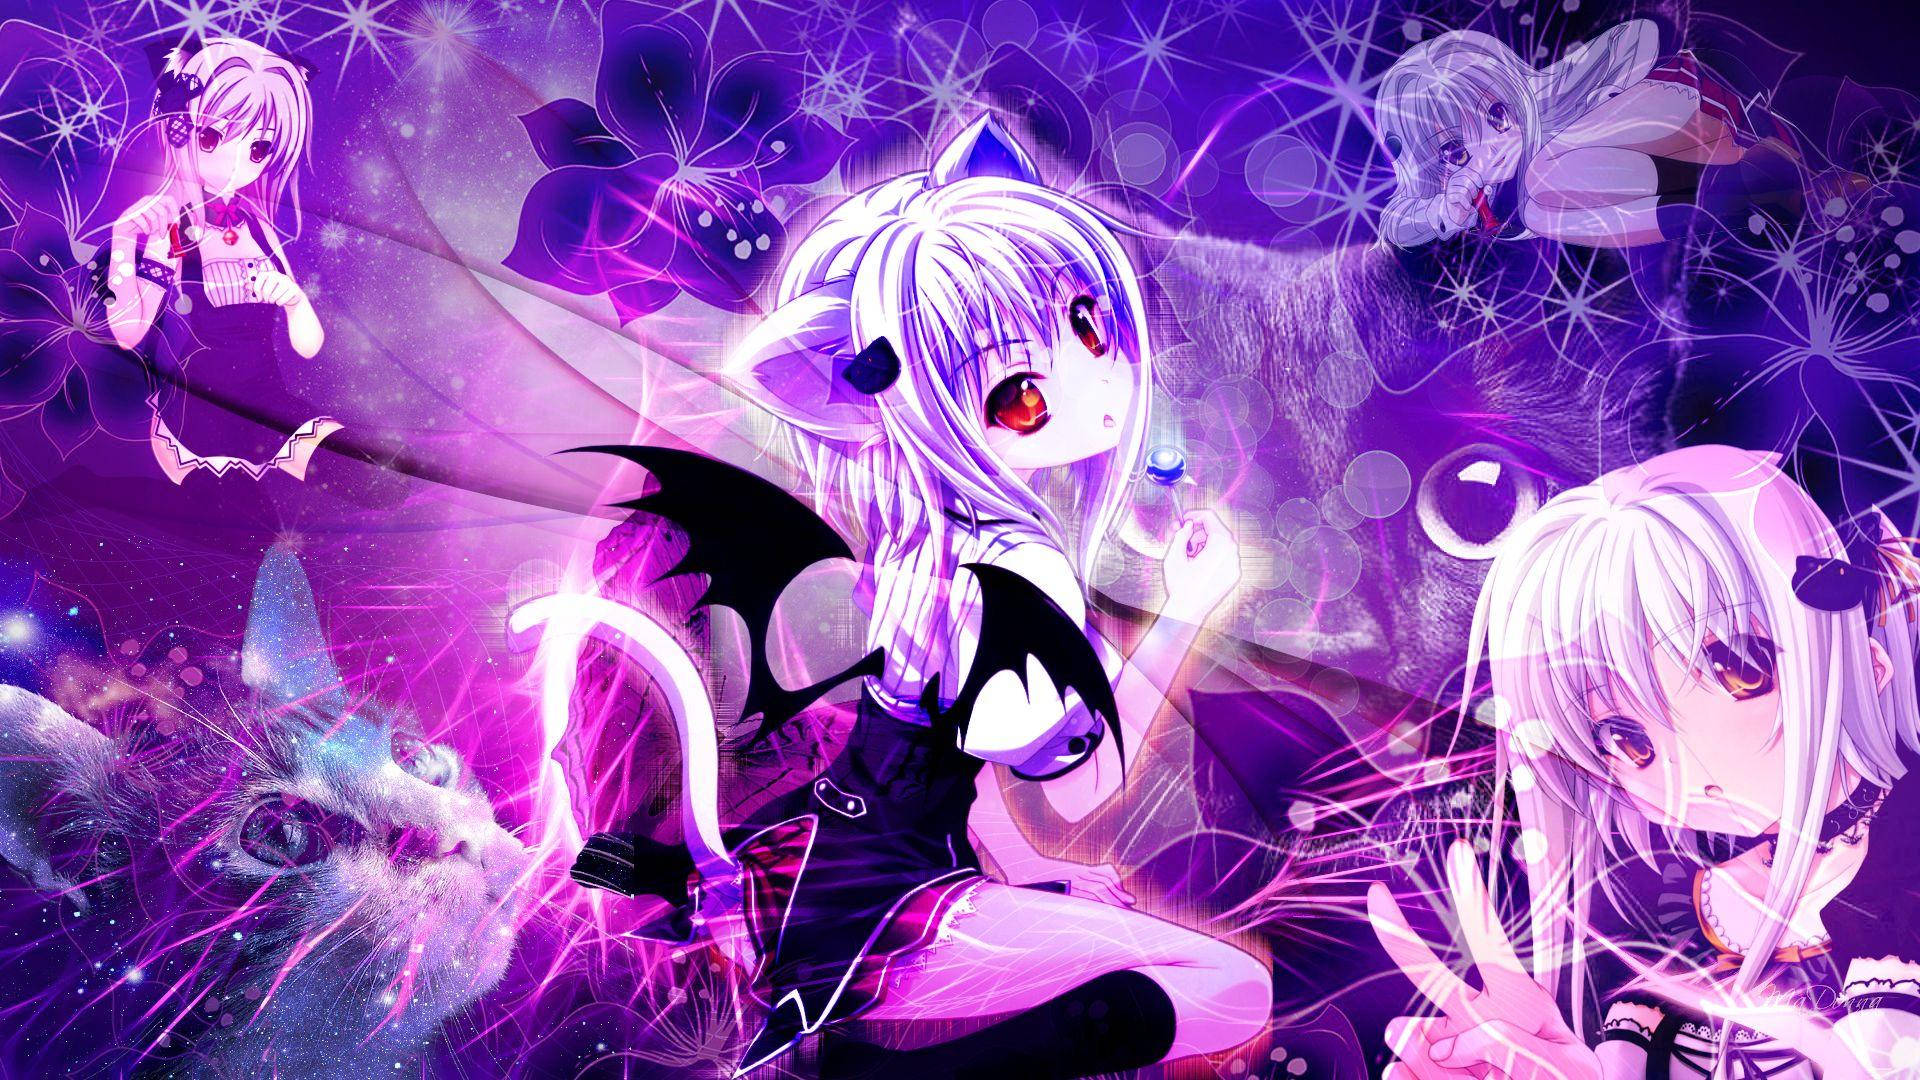 Koneko From Highschool Dxd Looking Cute And Mischievous. Background